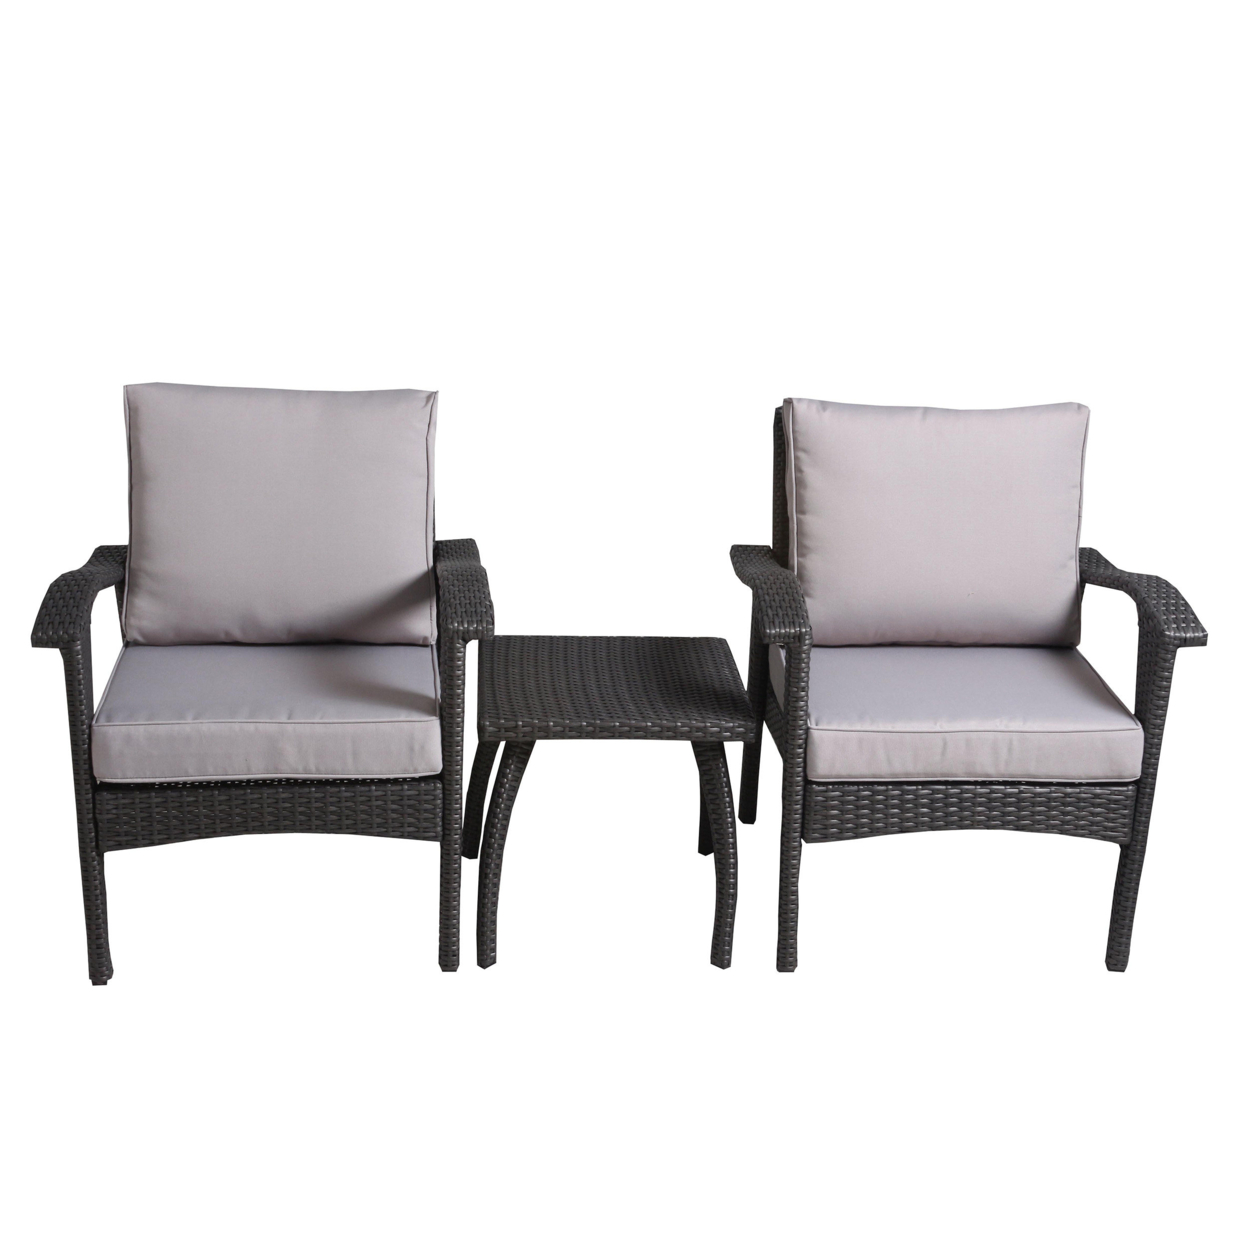 Maui Outdoor 3-piece Grey Wicker Chat Set With Cushions